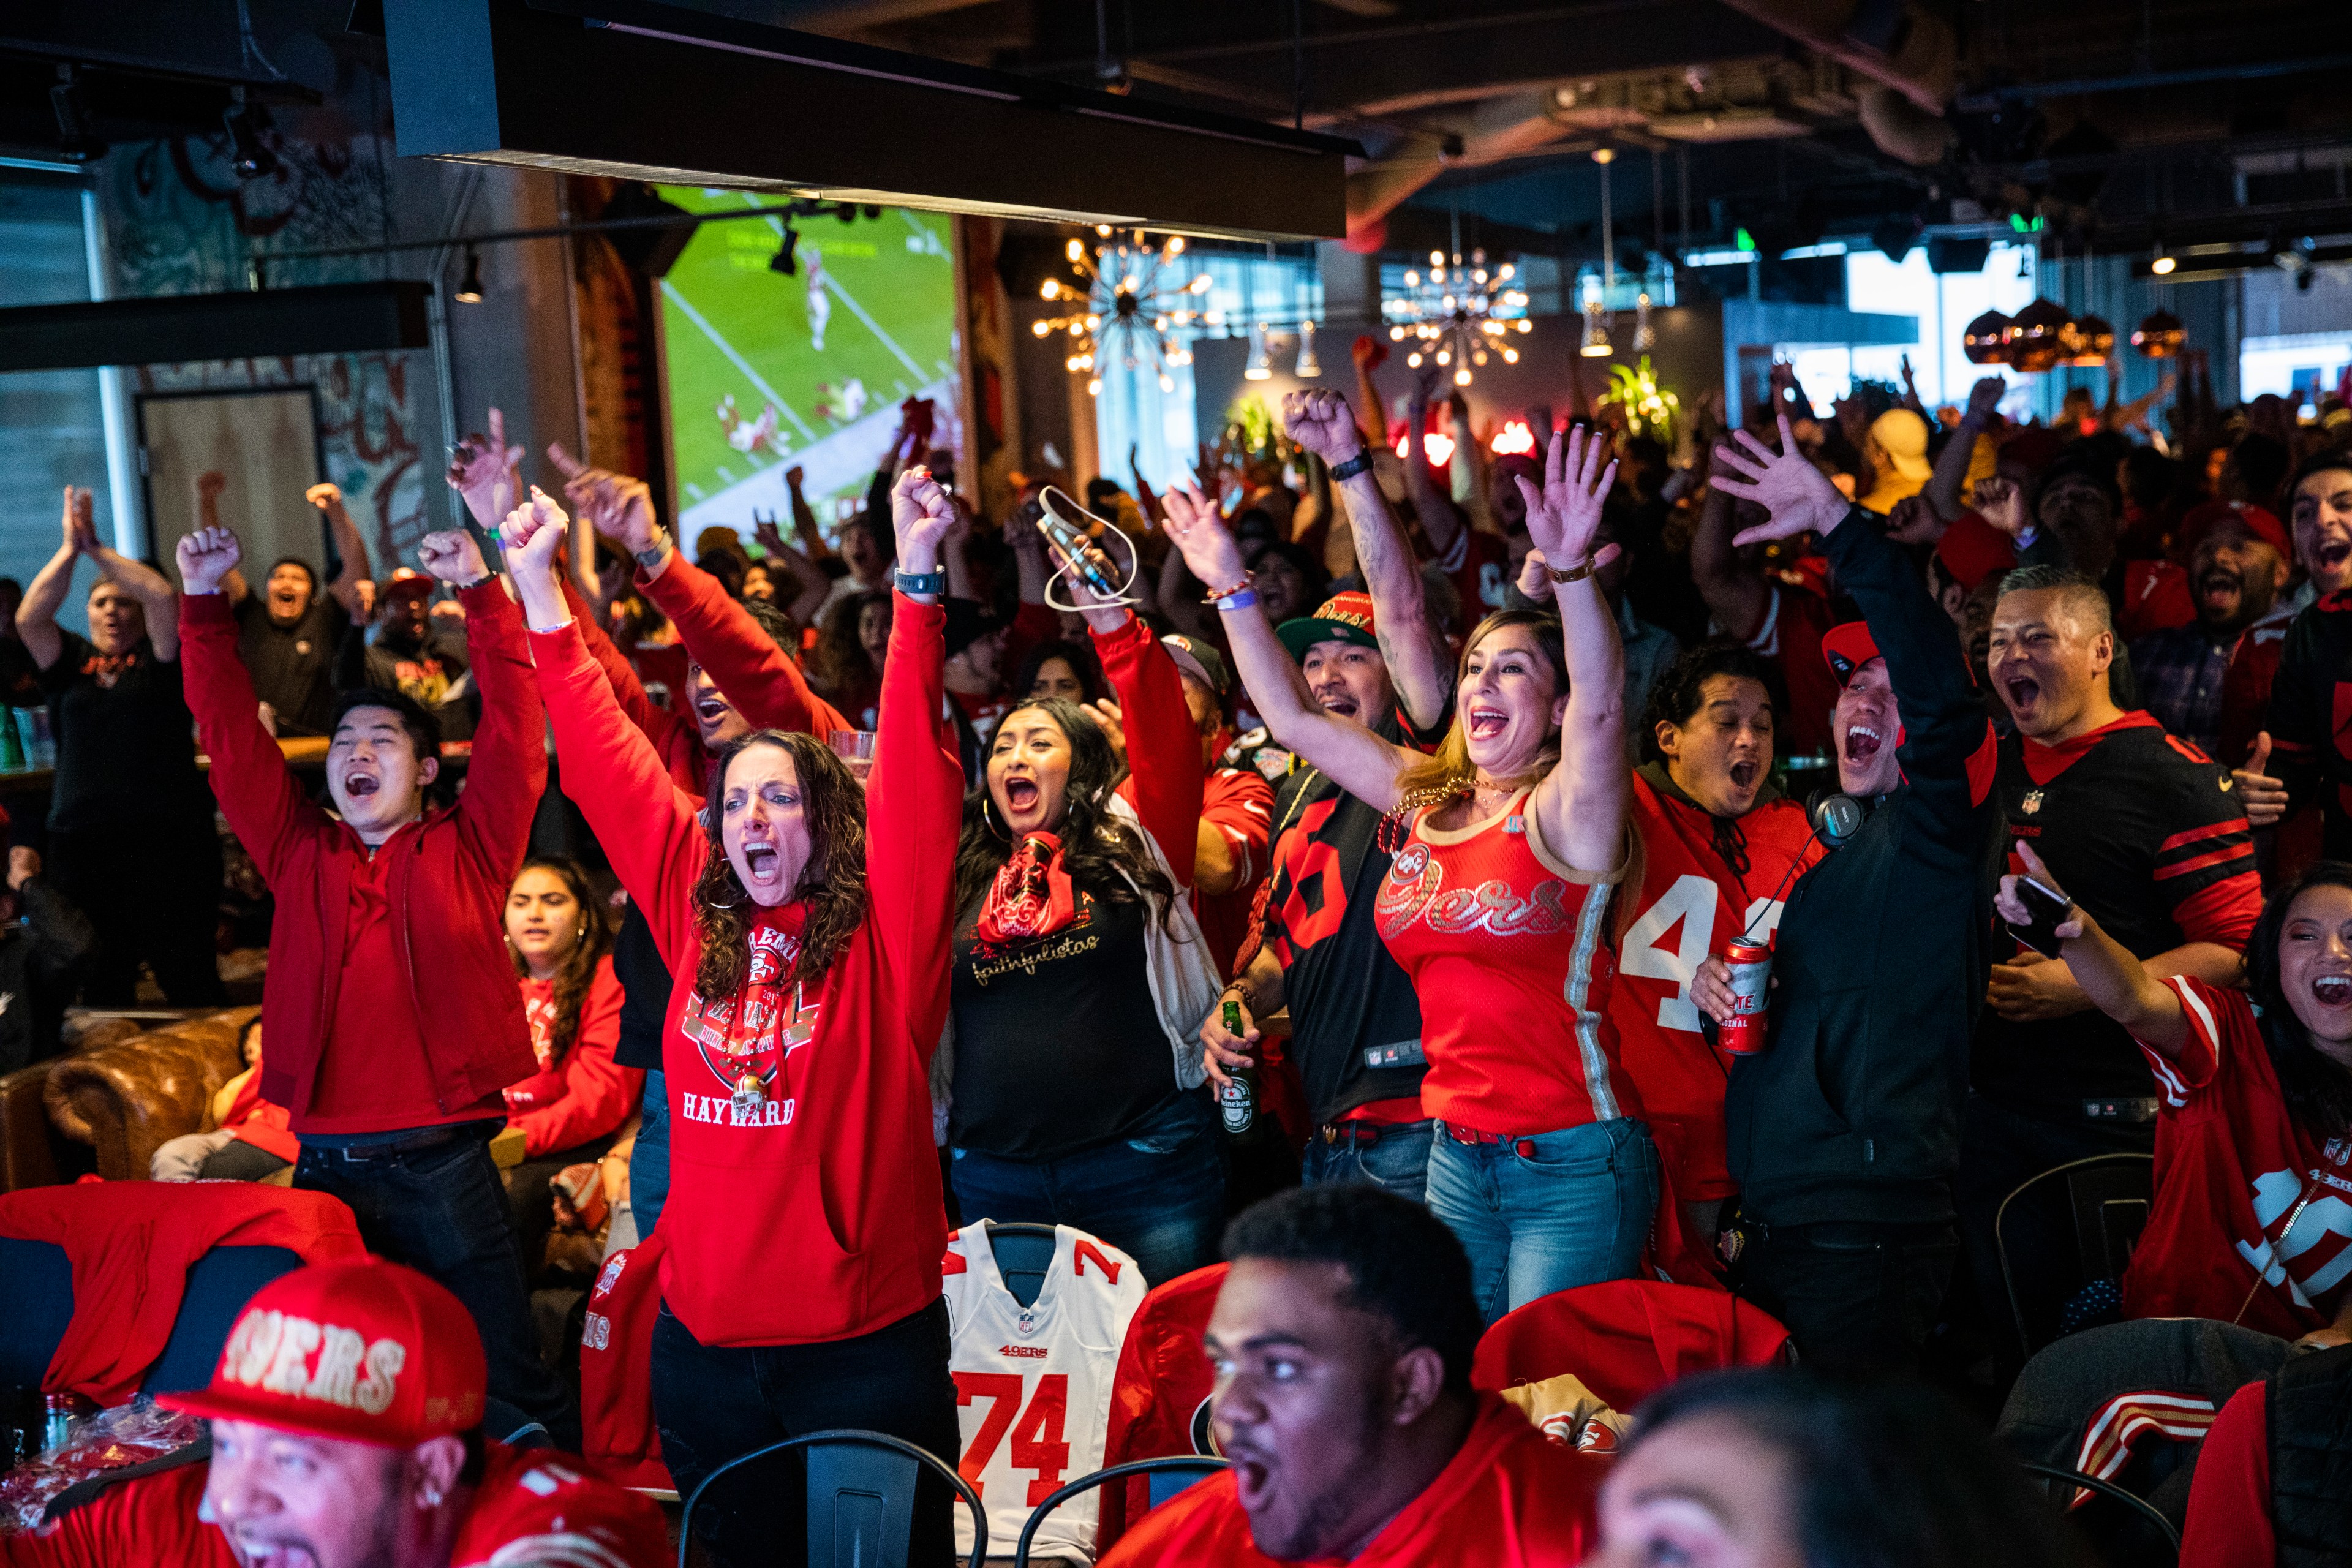 A large group of people wearing San Francisco 49ers apparel jump and raise their hands in the air while celebrating inside a sports bar.